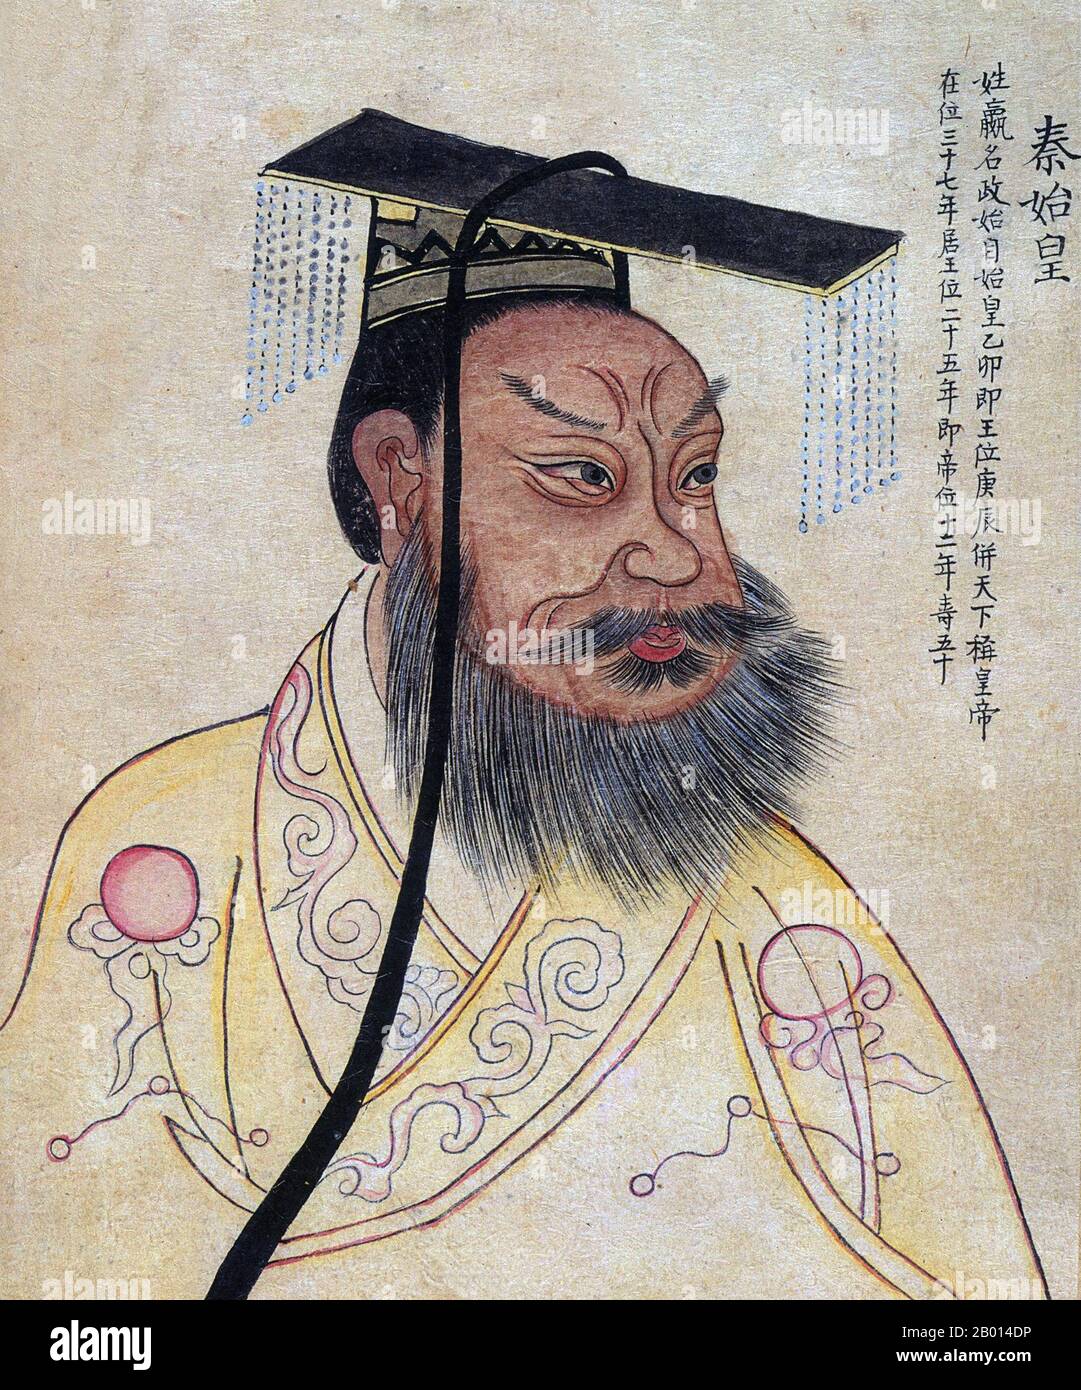 China: Qin Shi Huang/Qin Shi Huangdi (259-210 BCE), First Emperor of a unified China (r.246-221 BCE). Album leaf illustration, 19th century.  Qin Shi Huang, personal name Ying Zheng, was king of the Chinese State of Qin from 246 to 221 BCE during the Warring States Period. He became the first emperor of a unified China in 221 BCE, and ruled until his death in 210 BCE at the age of 49. Styling himself 'First Emperor' after China's unification, Qin Shi Huang is a pivotal figure in Chinese history, ushering in nearly two millennia of imperial rule. Stock Photo